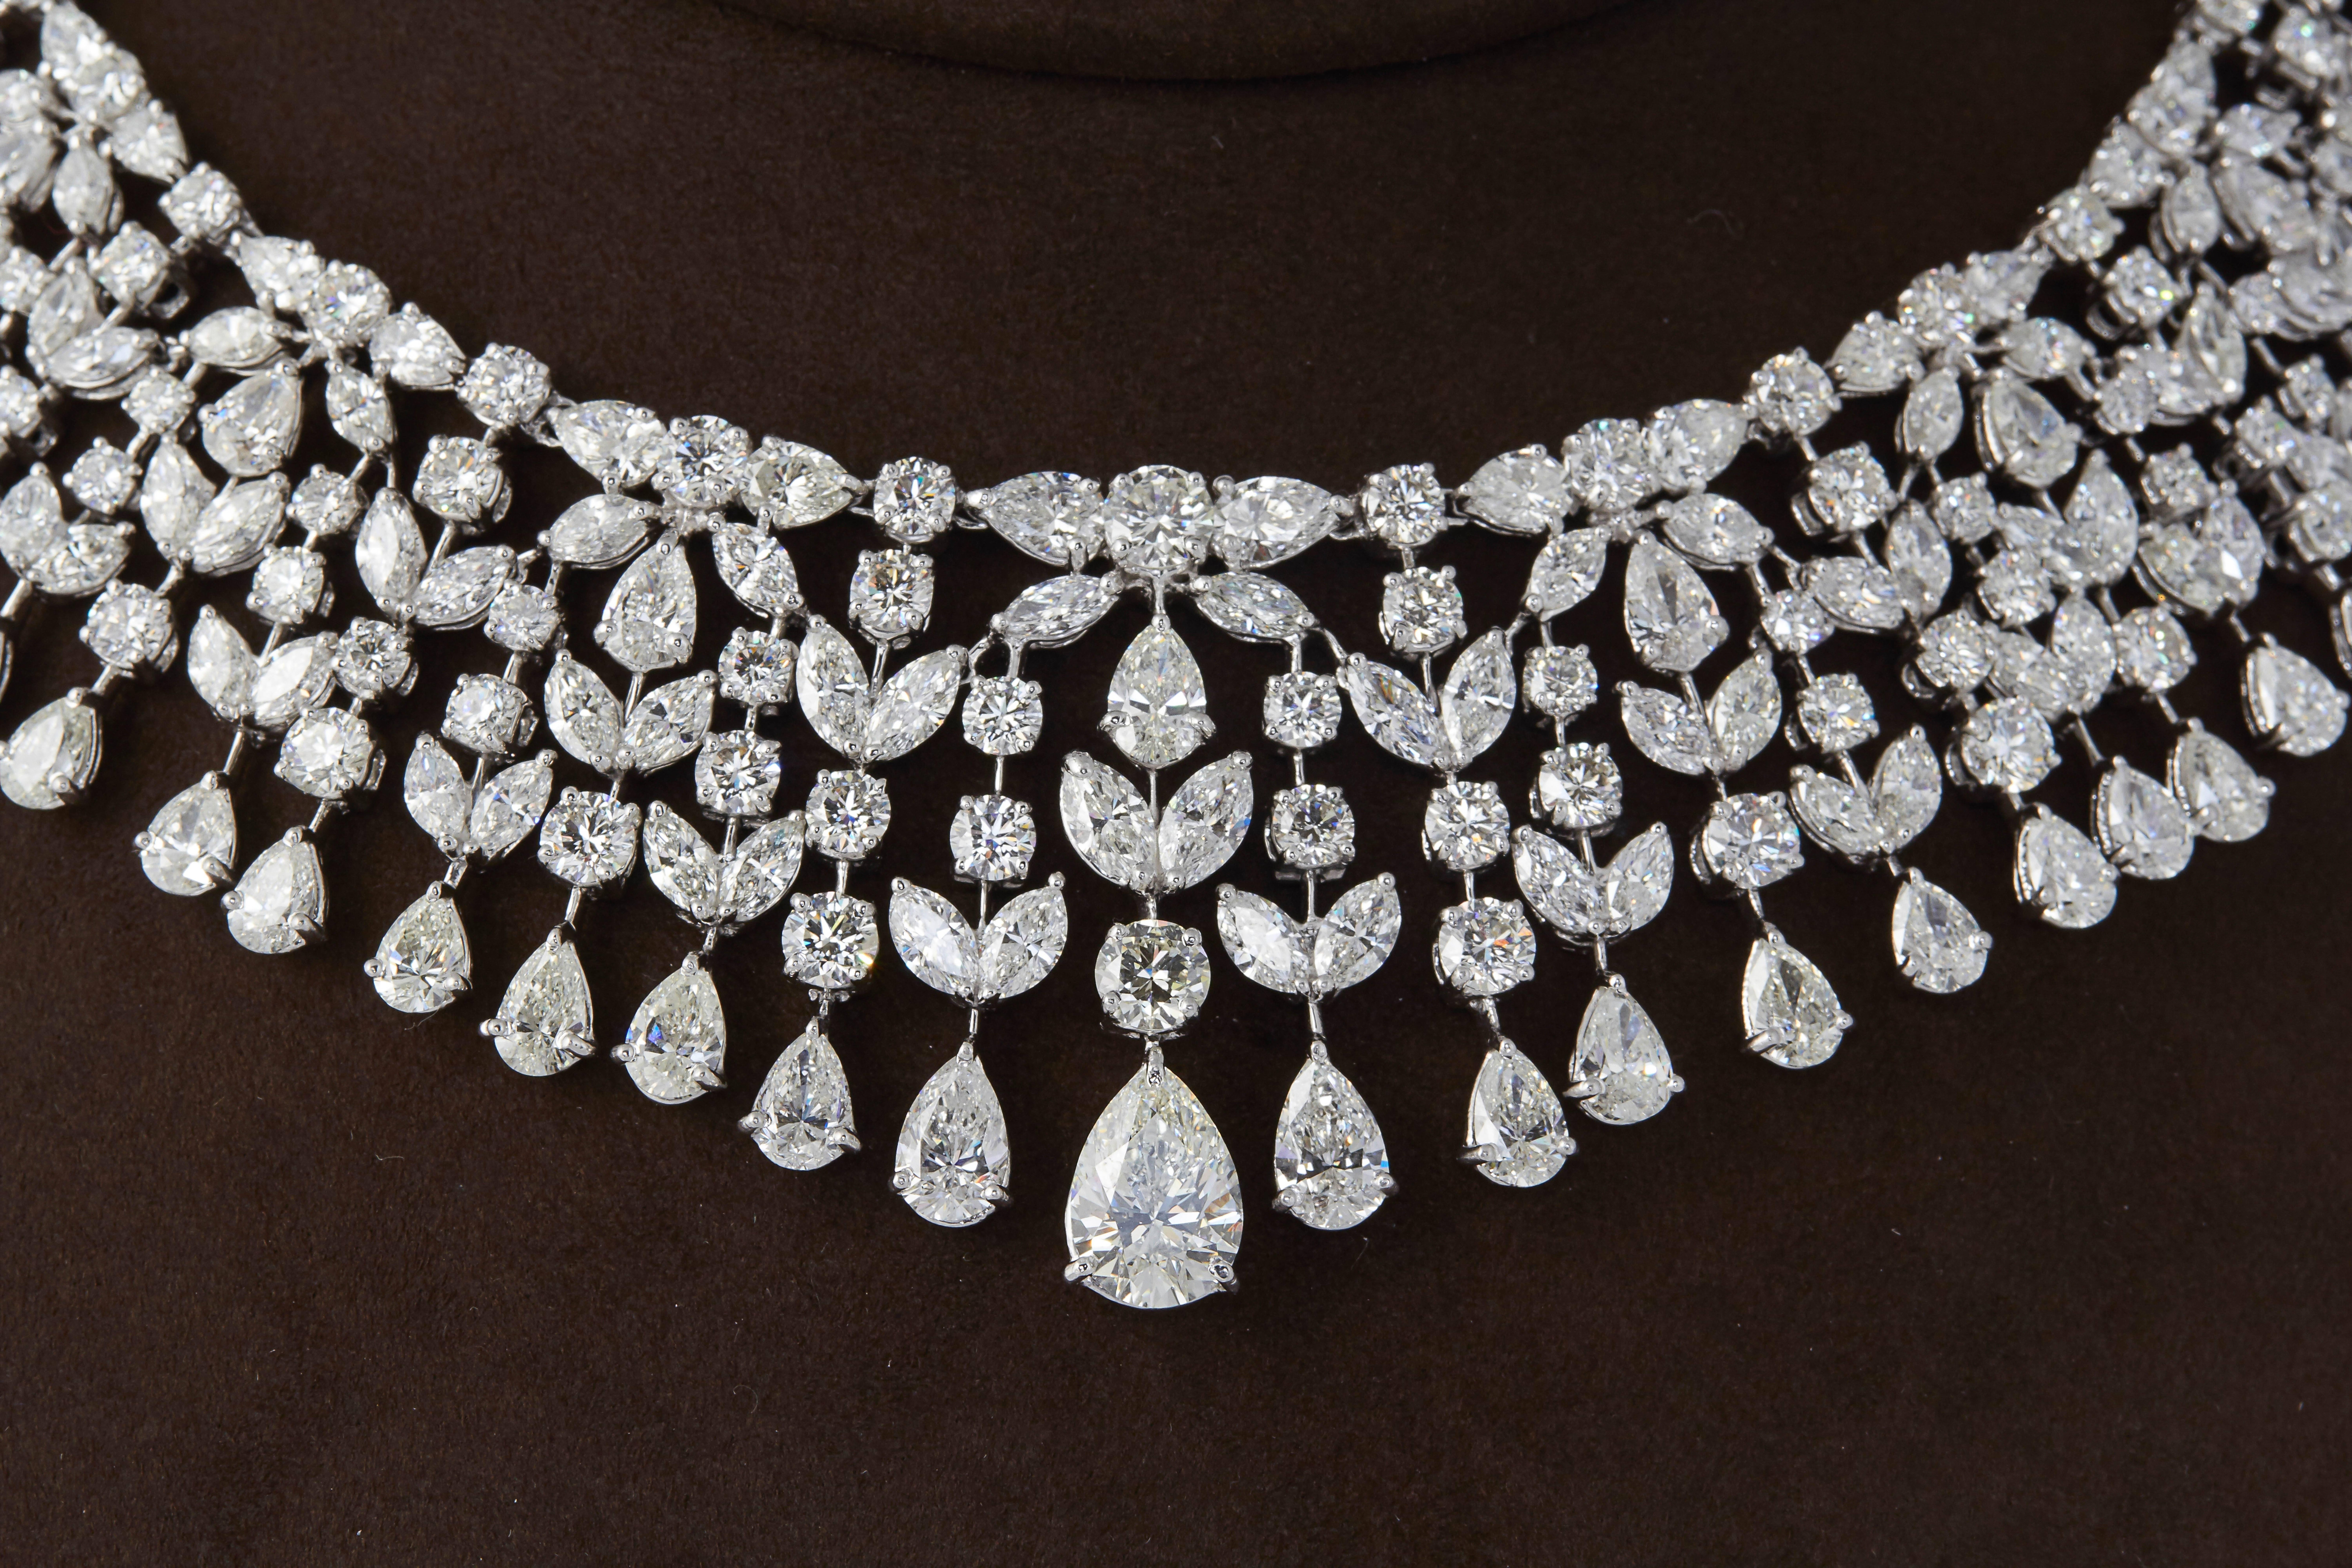 

An incredible important diamond necklace in a timeless design. 

104.20 of G color VS clarity pear, marquise, and round brilliant cut diamonds + a 3.20 GIA certified pear shape center diamond all set in platinum.

A total of 107.40 cts of